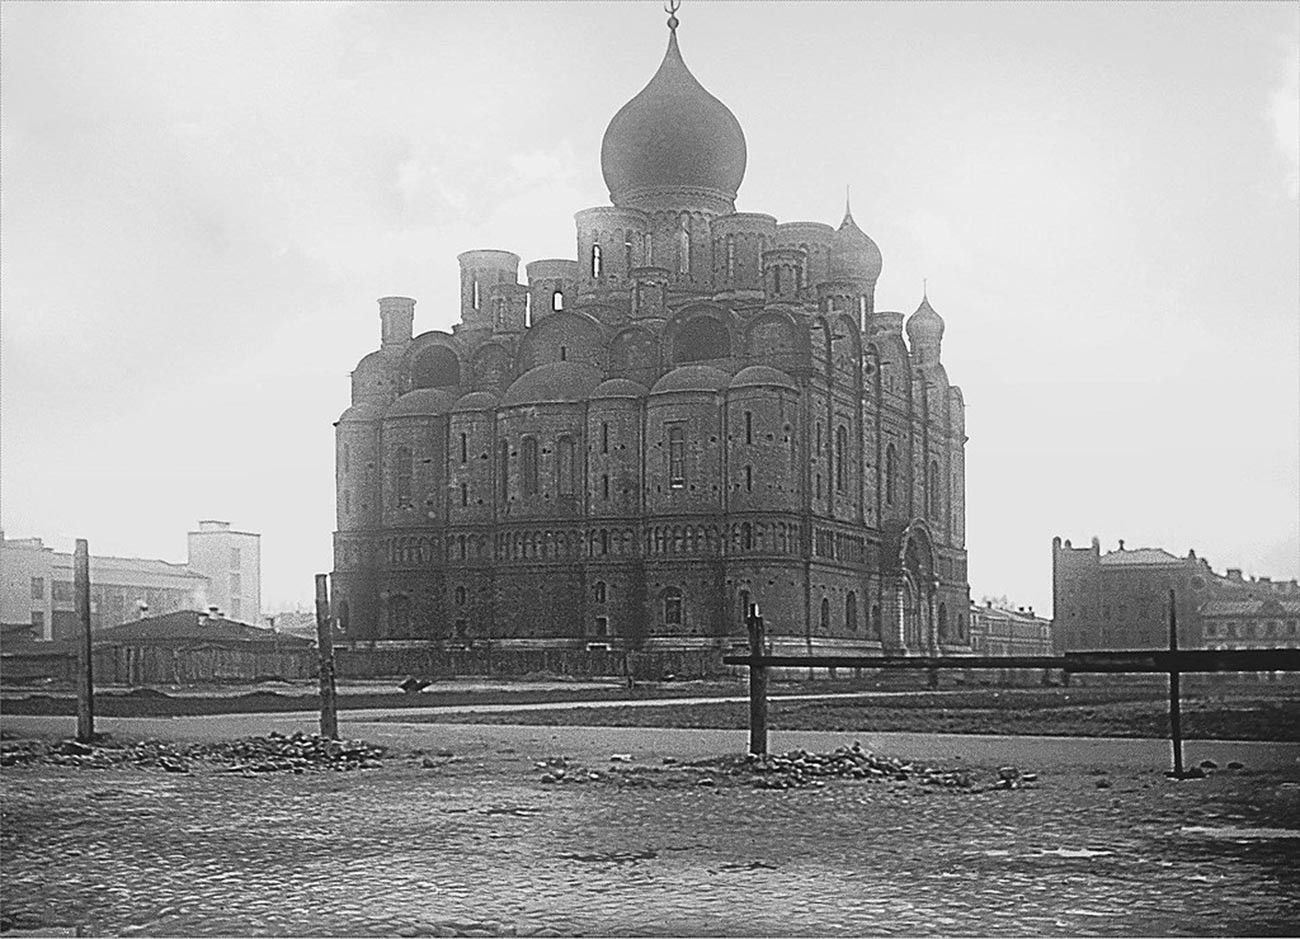 Alexander Nevsky Cathedral in 1921 